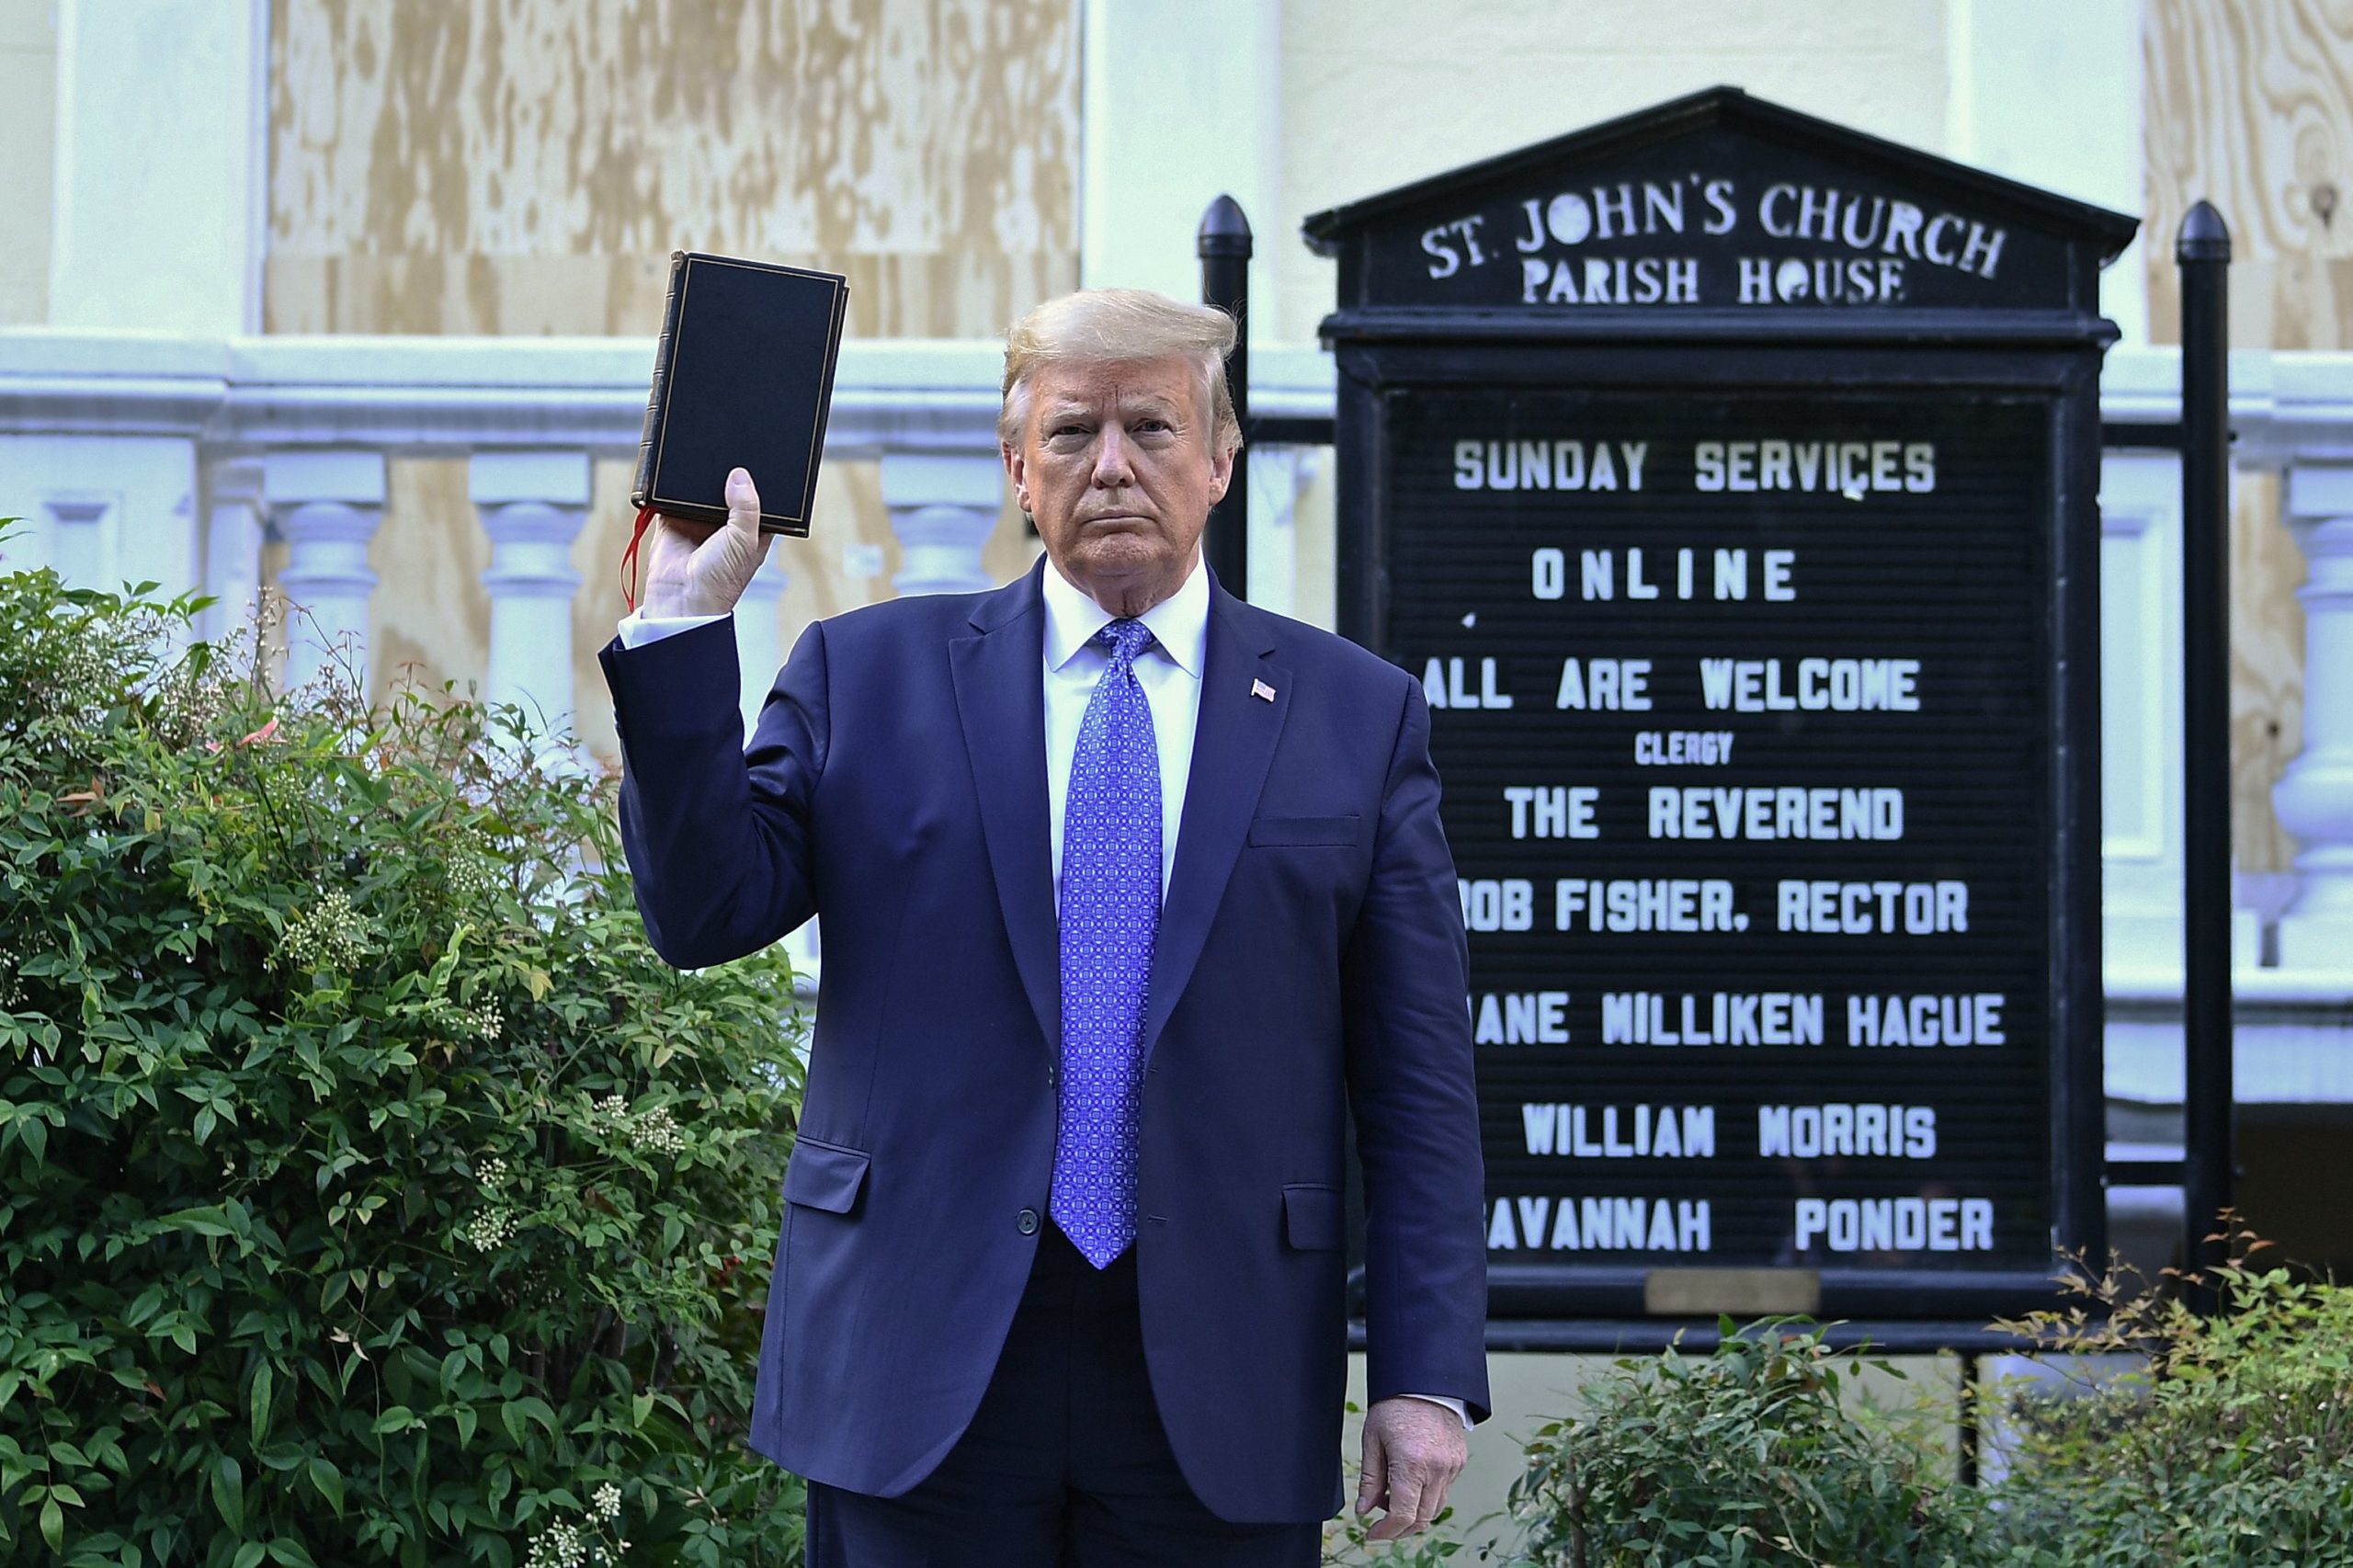 US President Donald Trump holds up a Bible outside of St John's Episcopal church across Lafayette Park in Washington, DC on June 1, 2020. - US President Donald Trump was due to make a televised address to the nation on Monday after days of anti-racism protests against police brutality that have erupted into violence. The White House announced that the president would make remarks imminently after he has been criticized for not publicly addressing in the crisis in recent days. (Photo by Brendan Smialowski / AFP) (Photo by BRENDAN SMIALOWSKI/AFP via Getty Images)